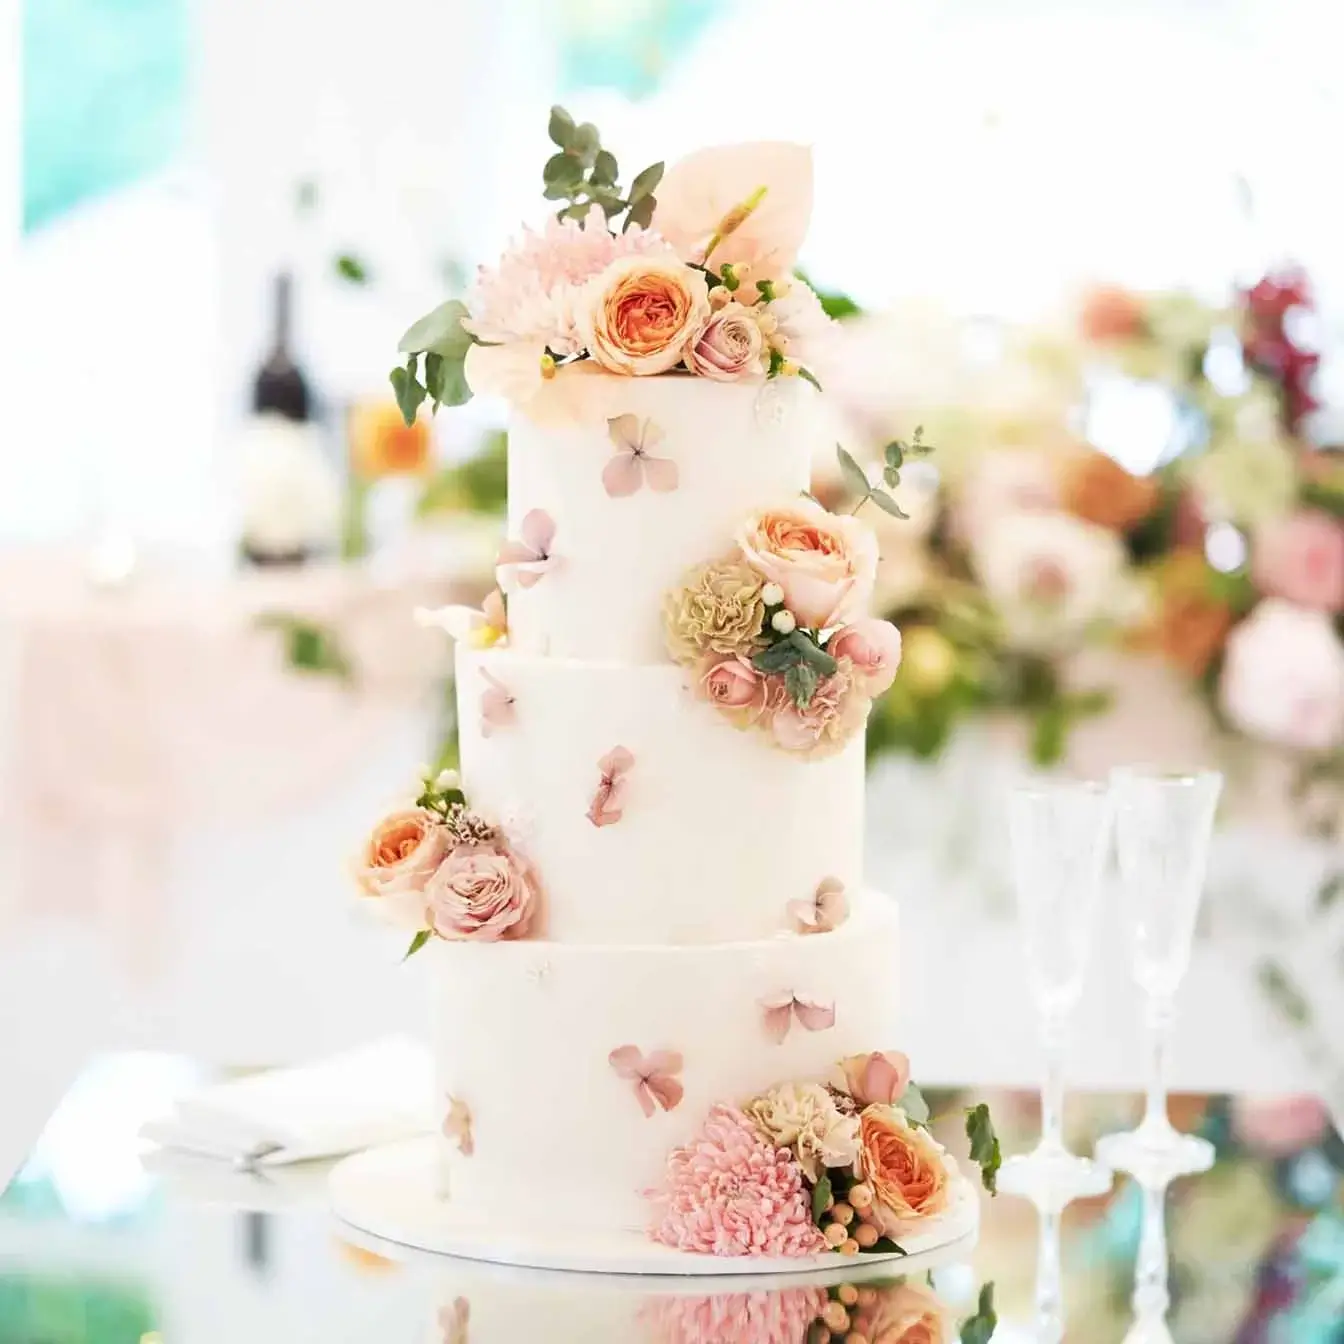 Floral Harmony Wedding Cake - A three-tier cake with scattered dried hydrangeas, fresh flowers, and molded roses on an ivory base, a breathtaking centerpiece for weddings filled with sophistication and natural grace.